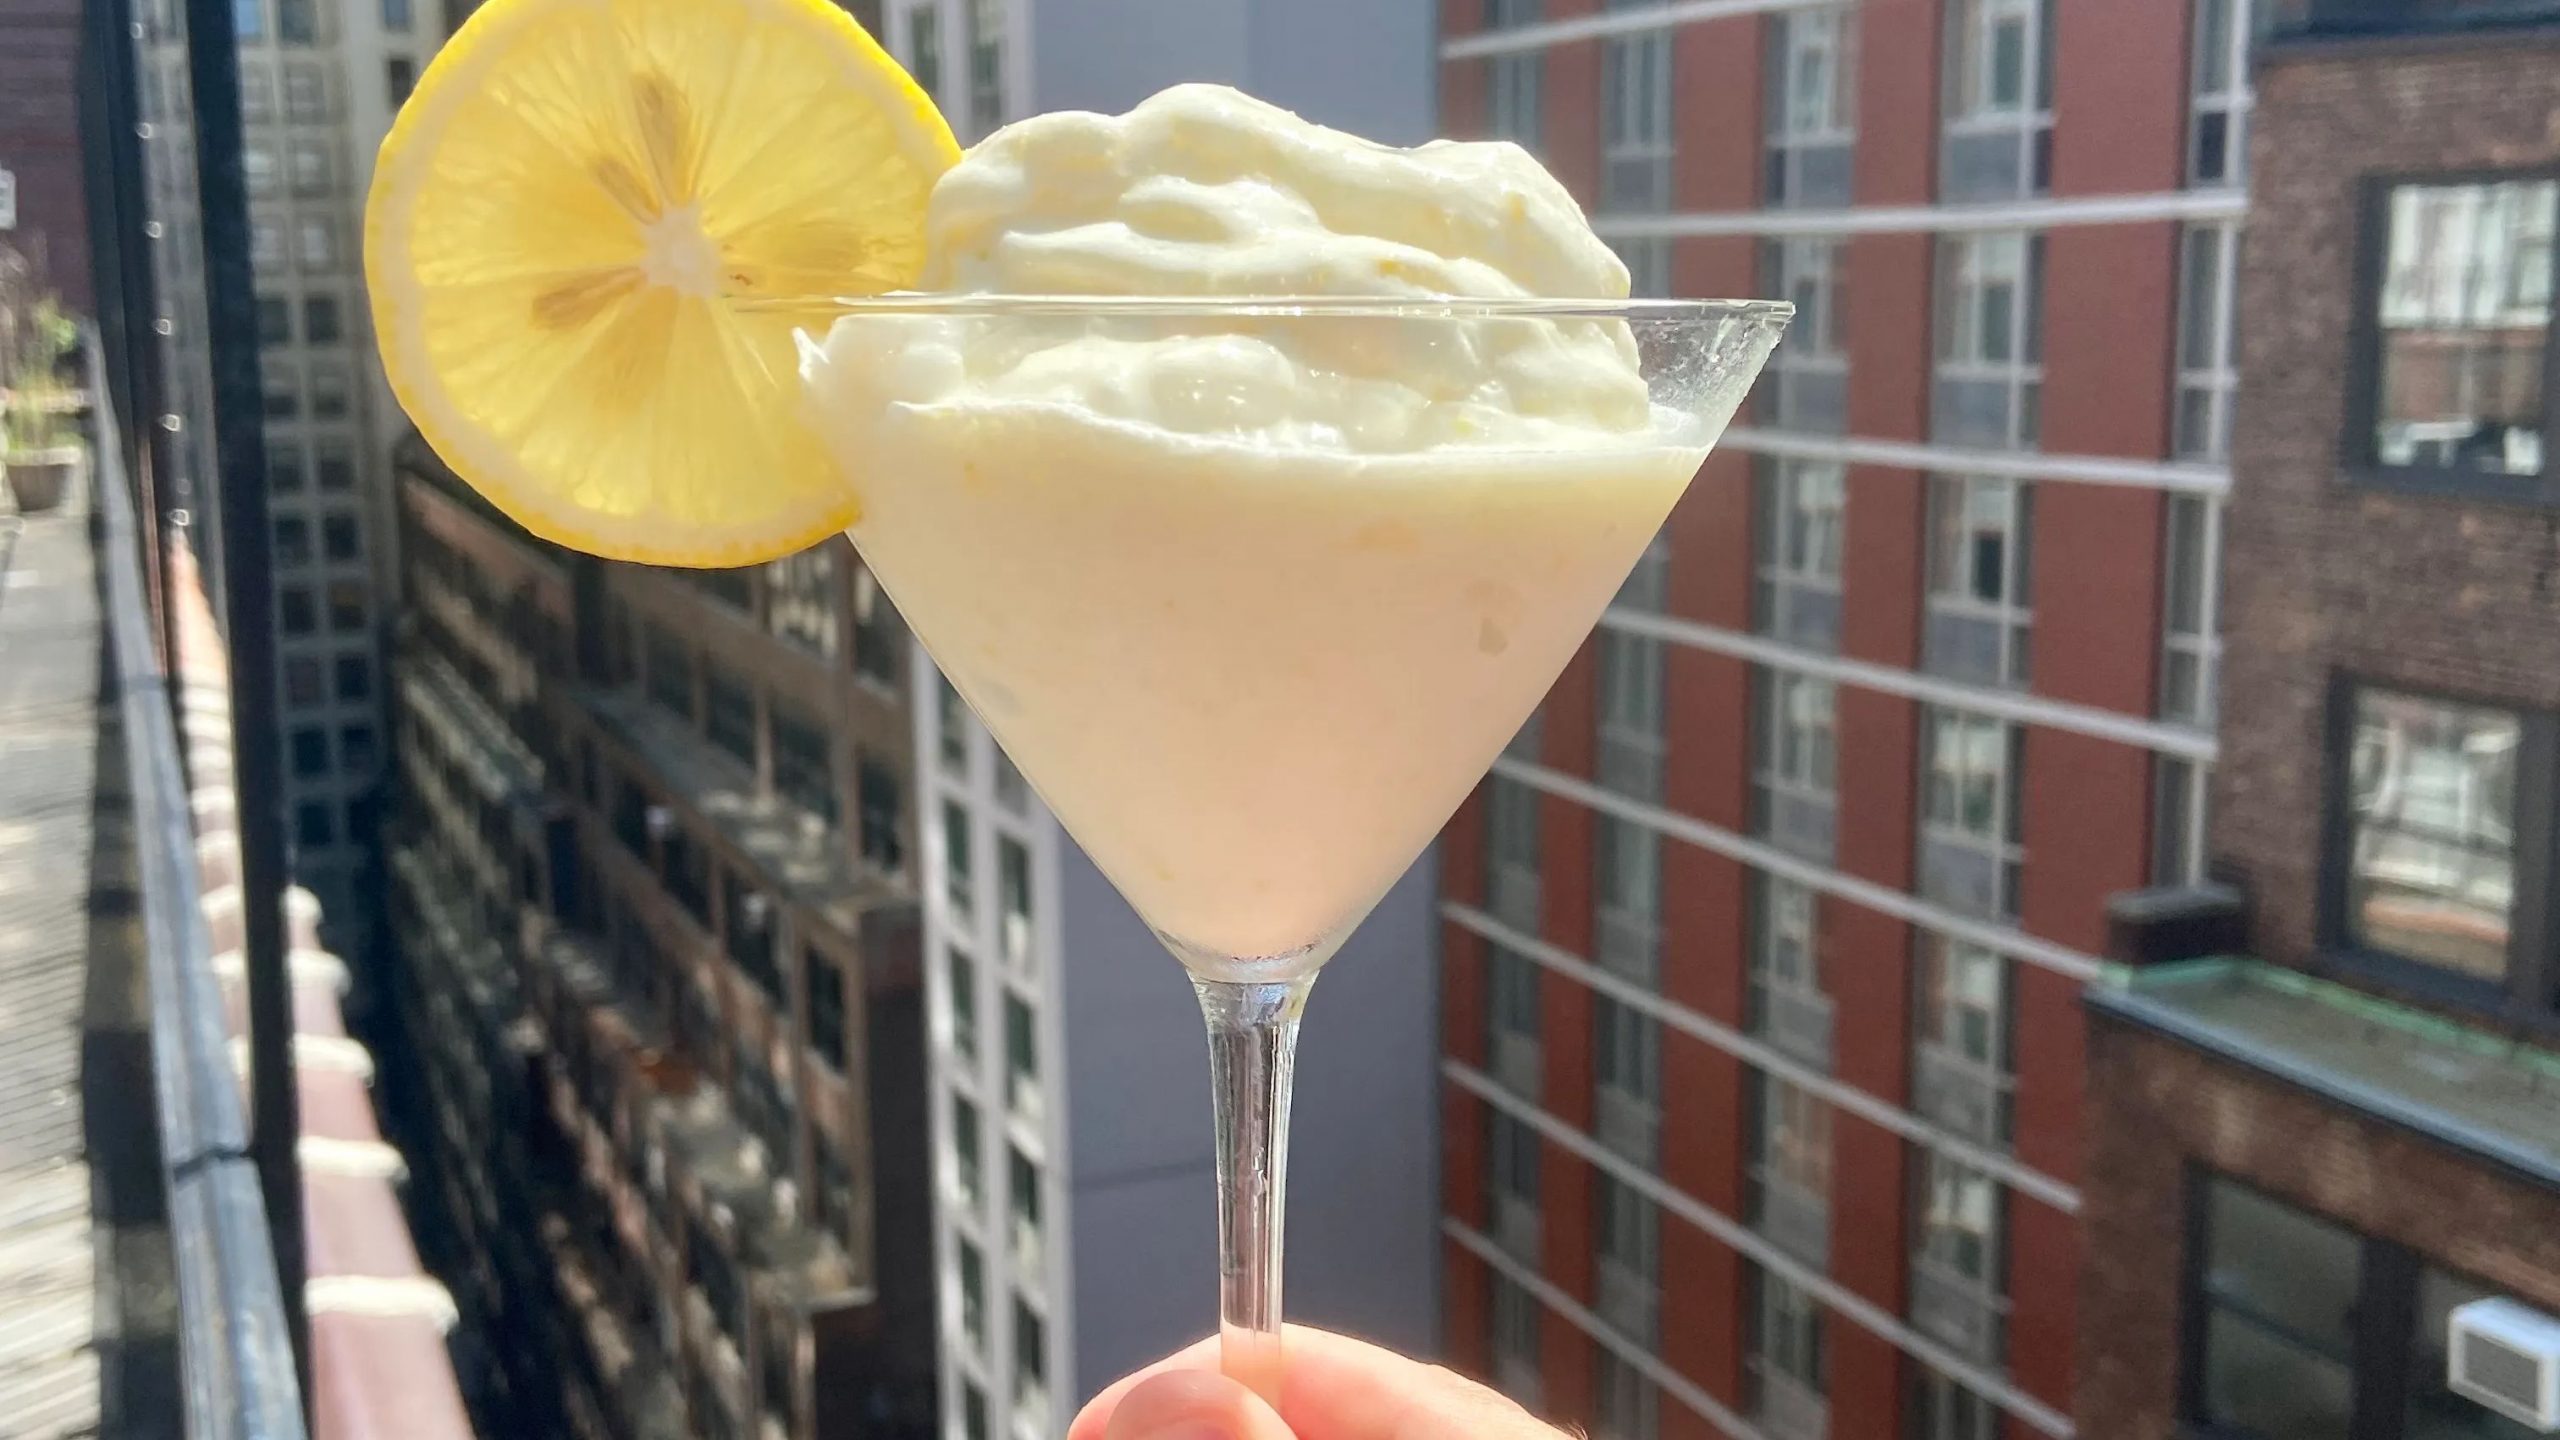 Whipped lemonade is the new food trend. Learn how to make it